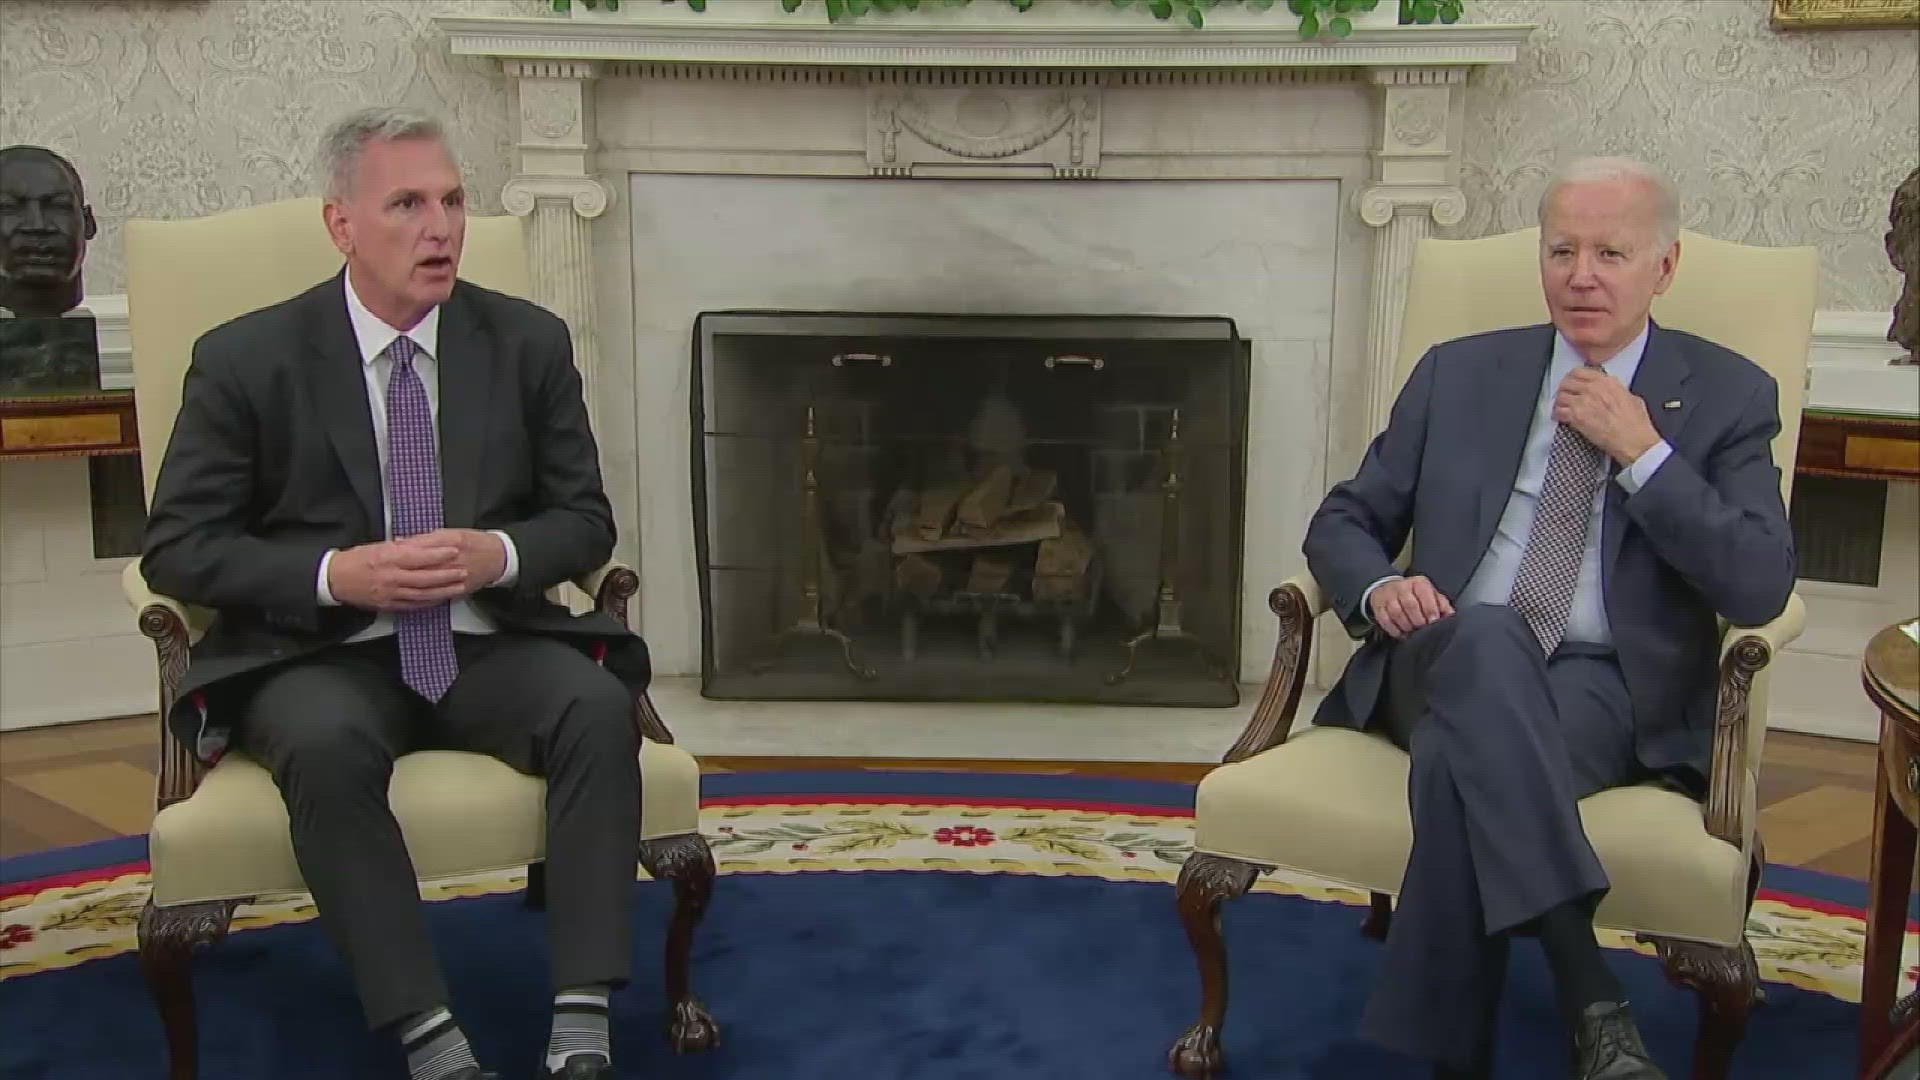 House Speaker Kevin McCarthy and President Joe Biden negotiated together to try and find a solution for the debt ceiling as the deadline looms.